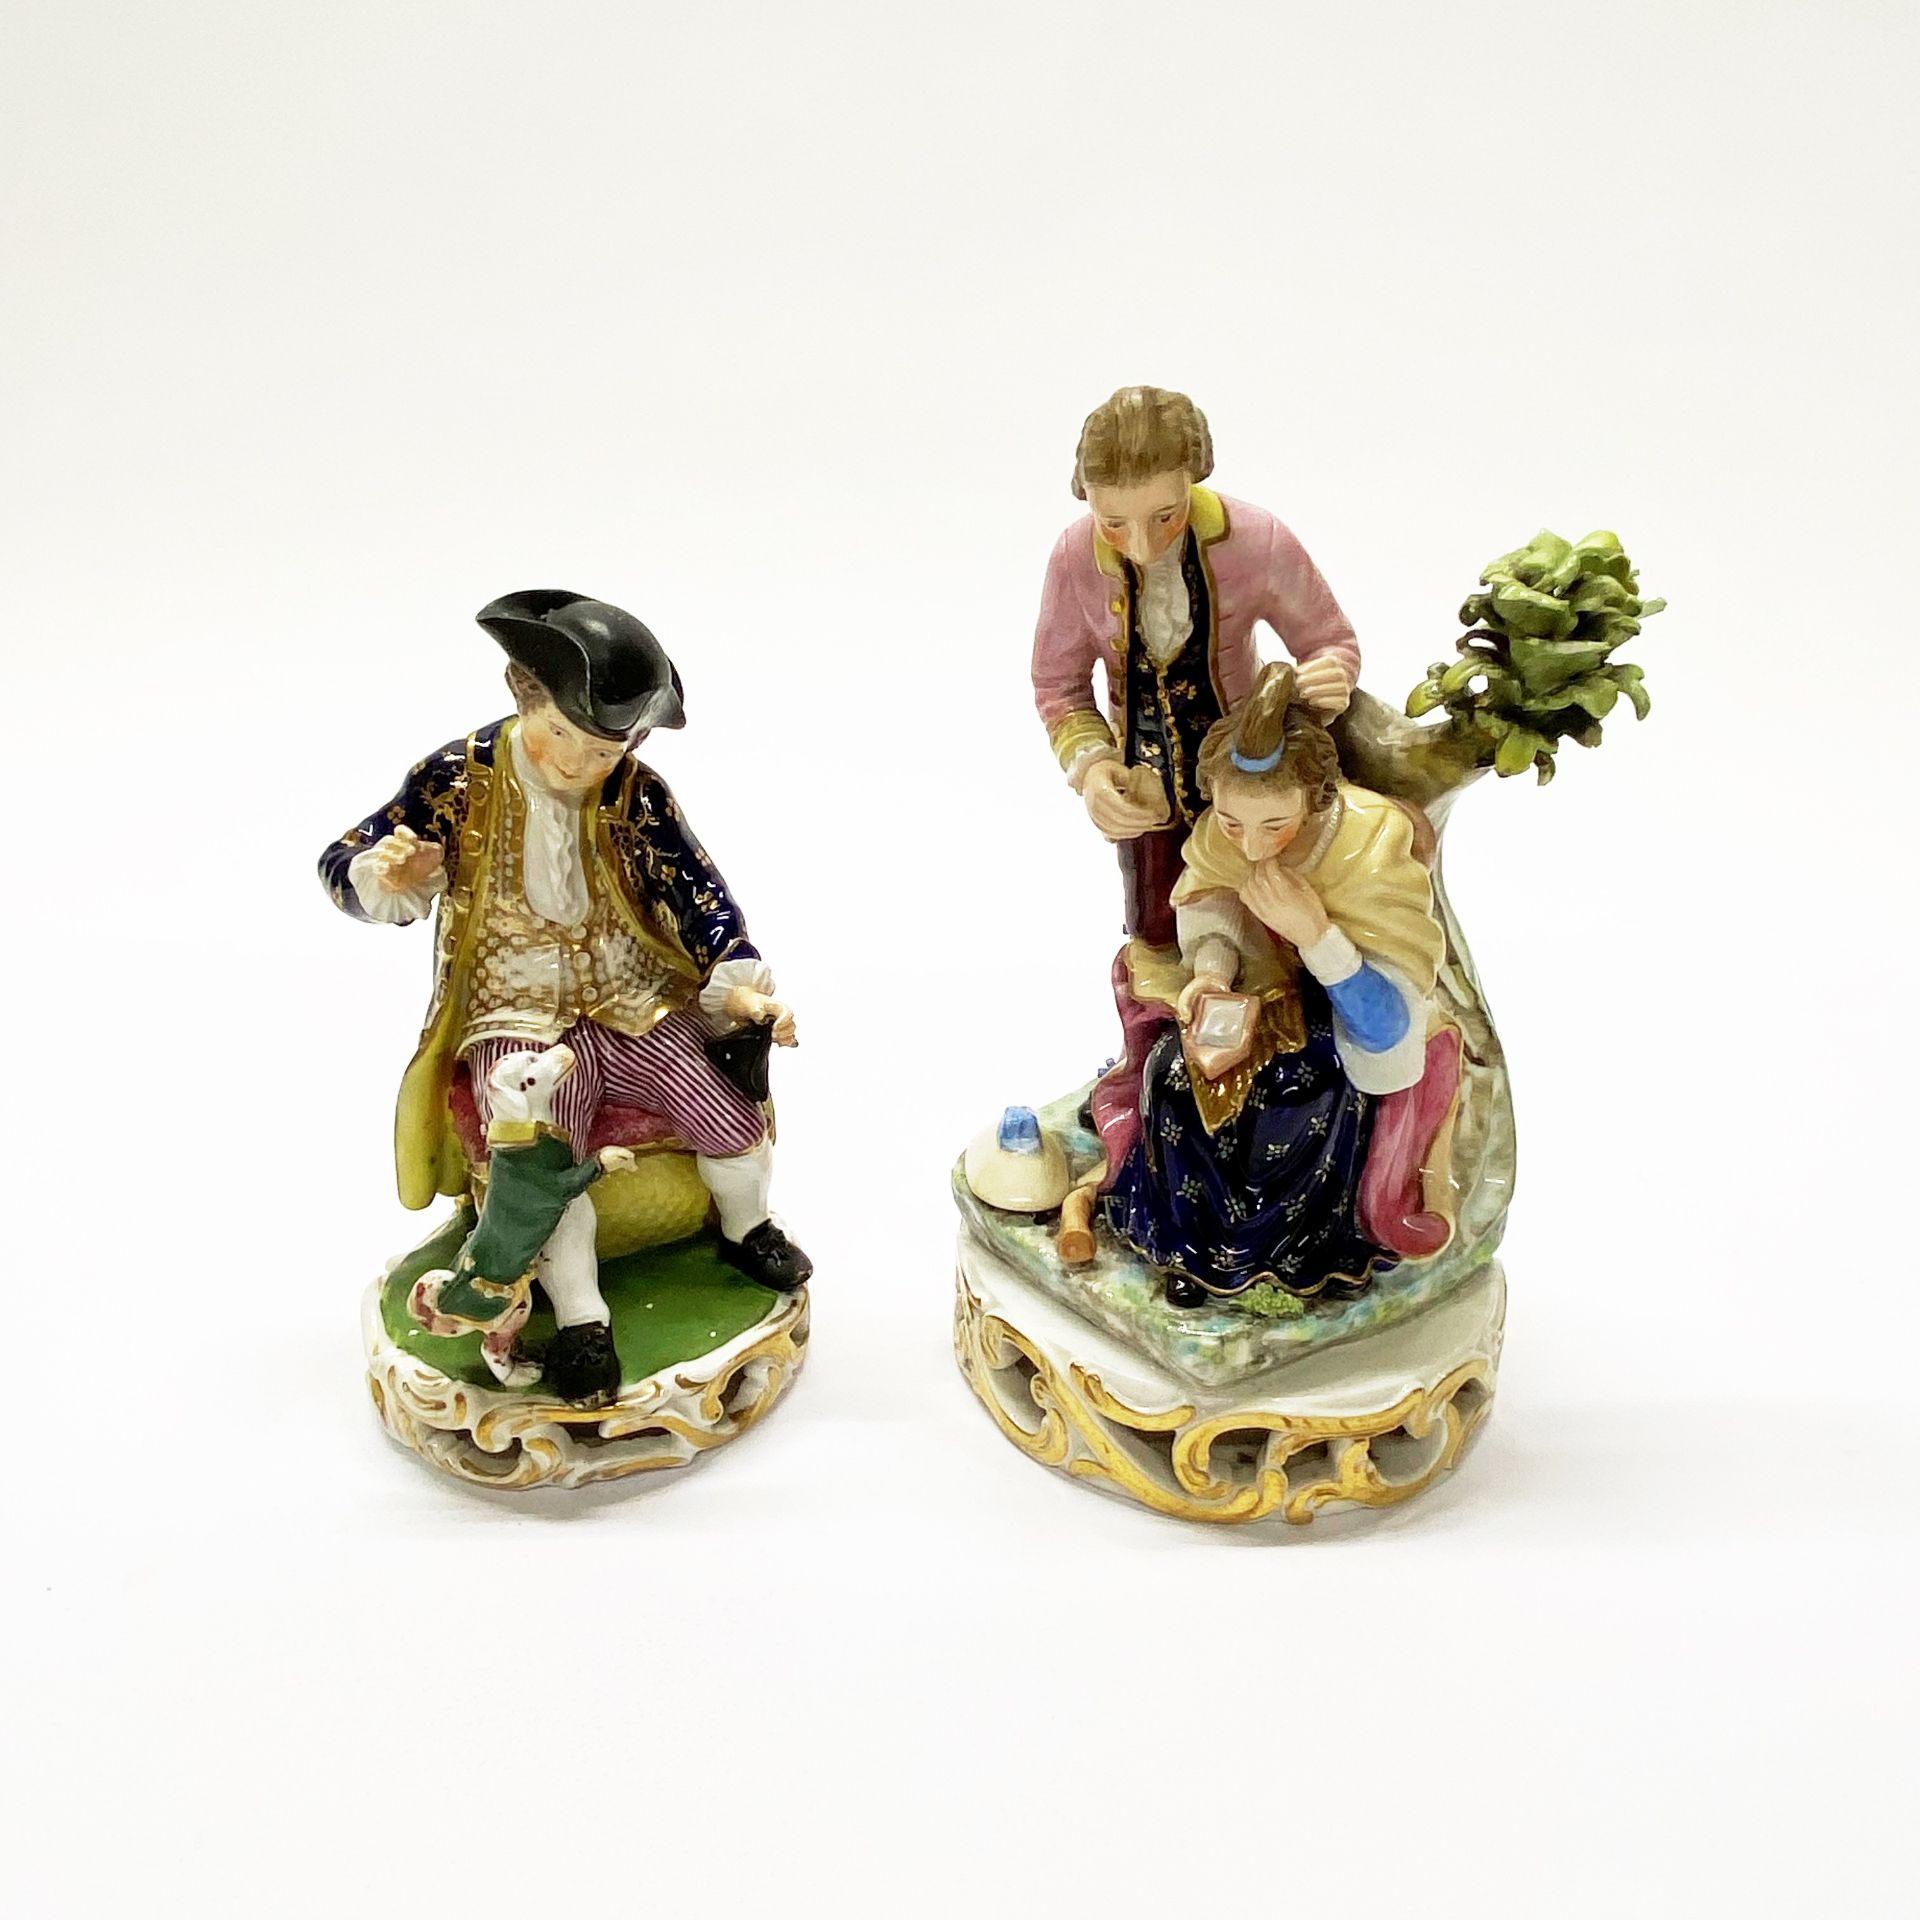 An early Bloor Derby porcelain figure of a boy with a performing dog together with Bloor Derby